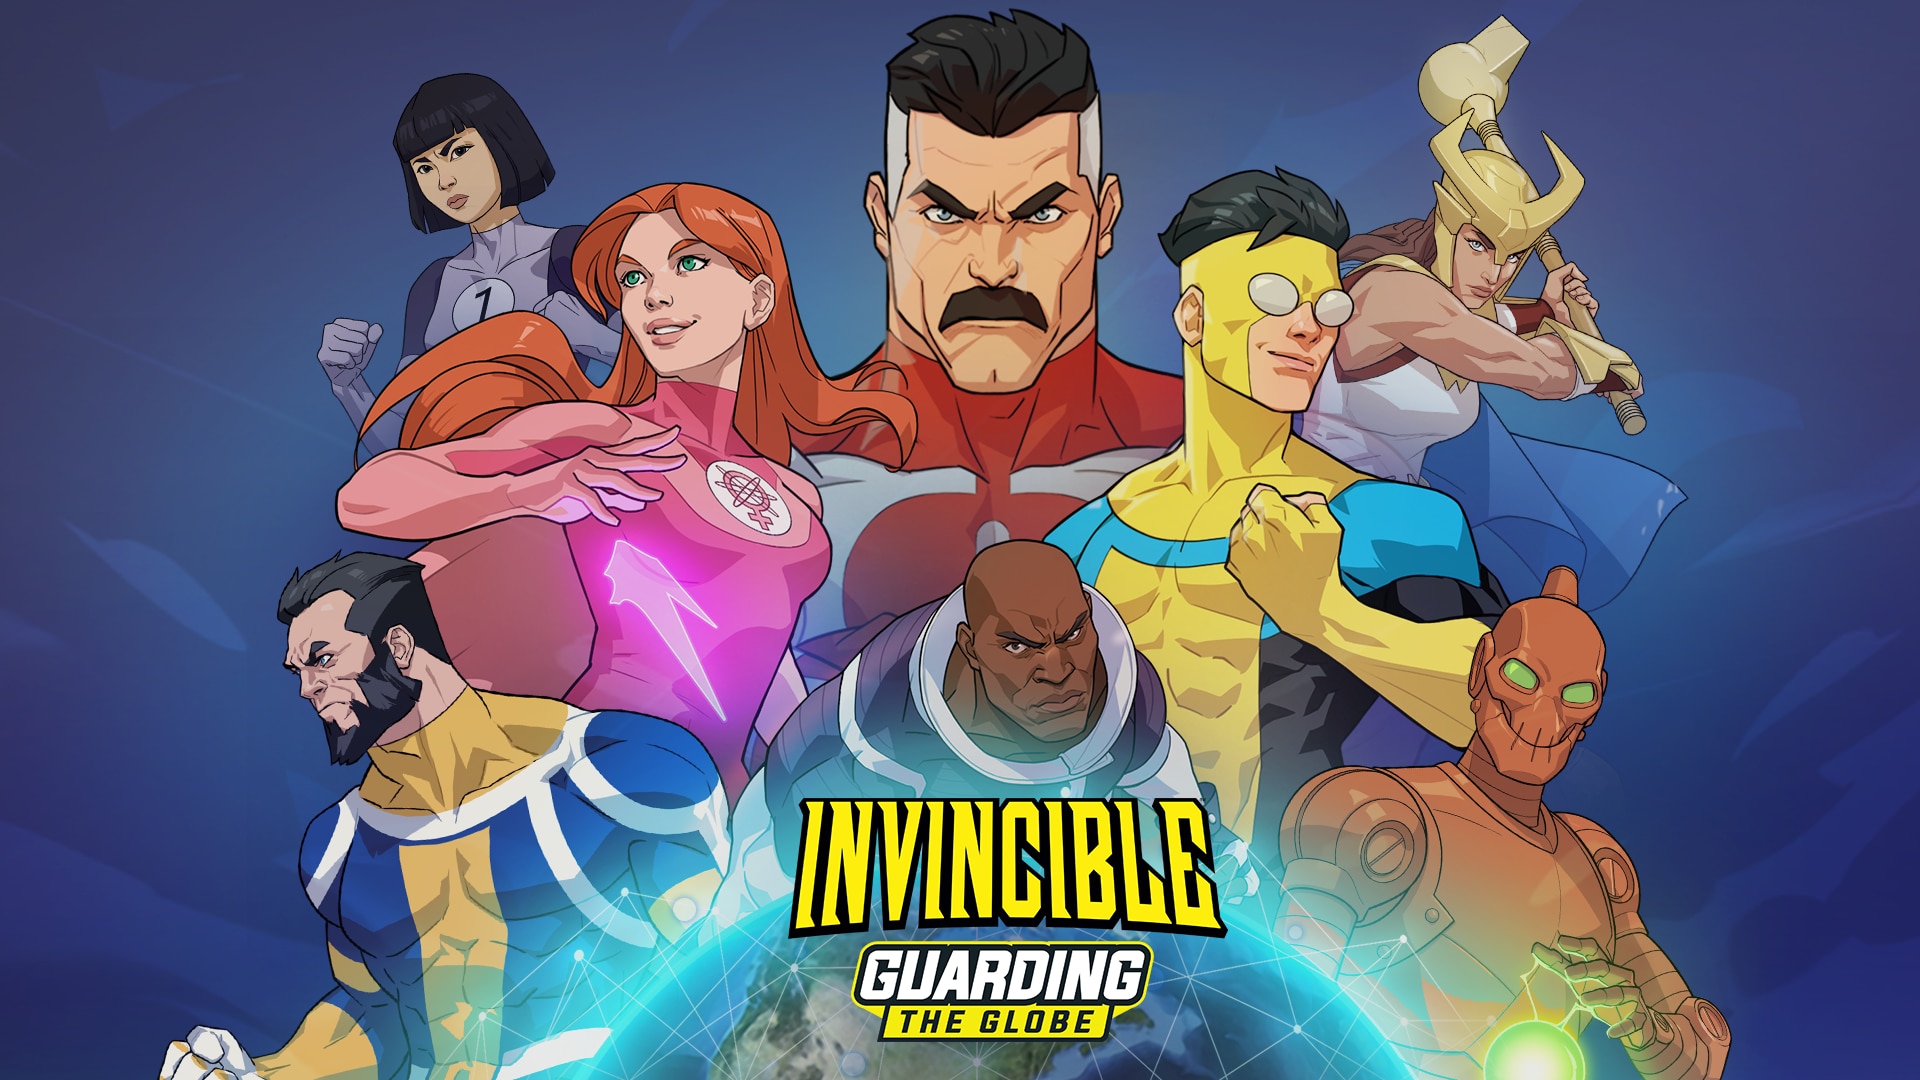 Invincible: Season 2 Exclusive Poster Revealed